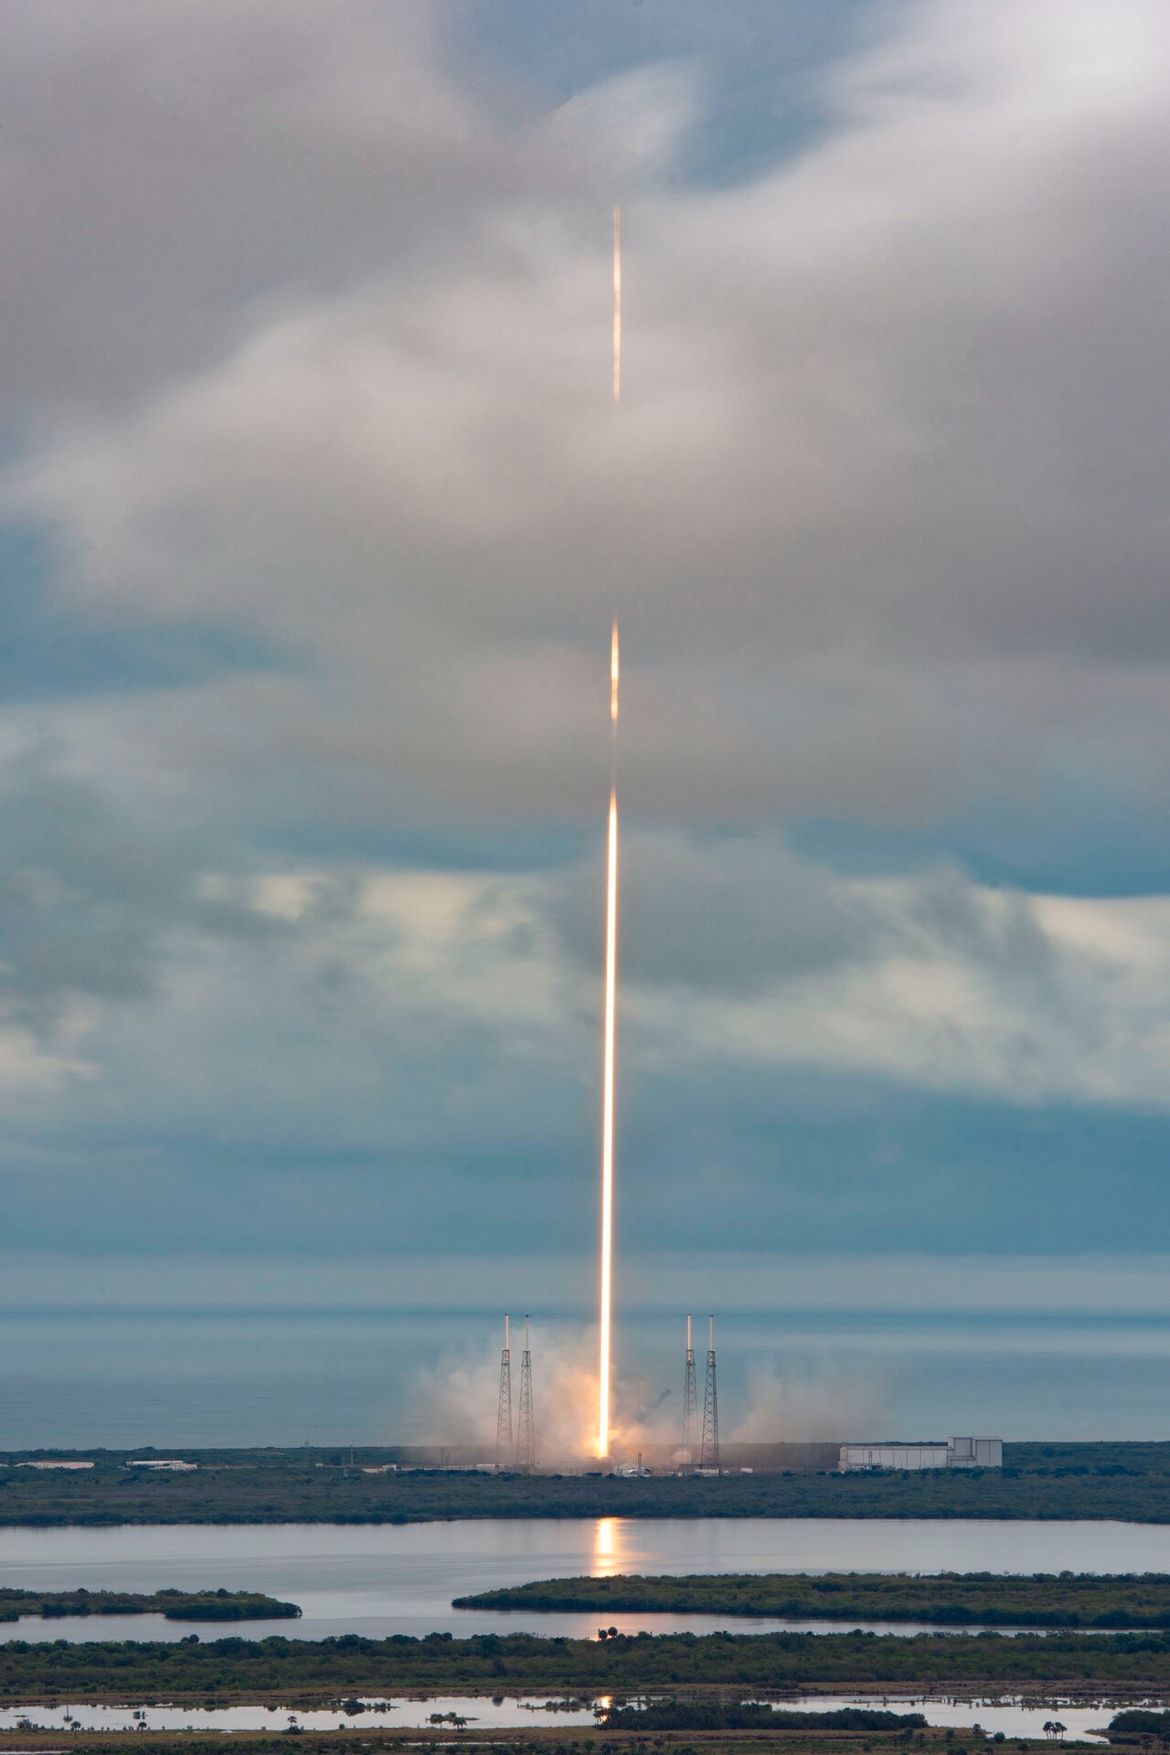 Falcon 9 Transporter-4 soaring in the sky of Cape canaveral